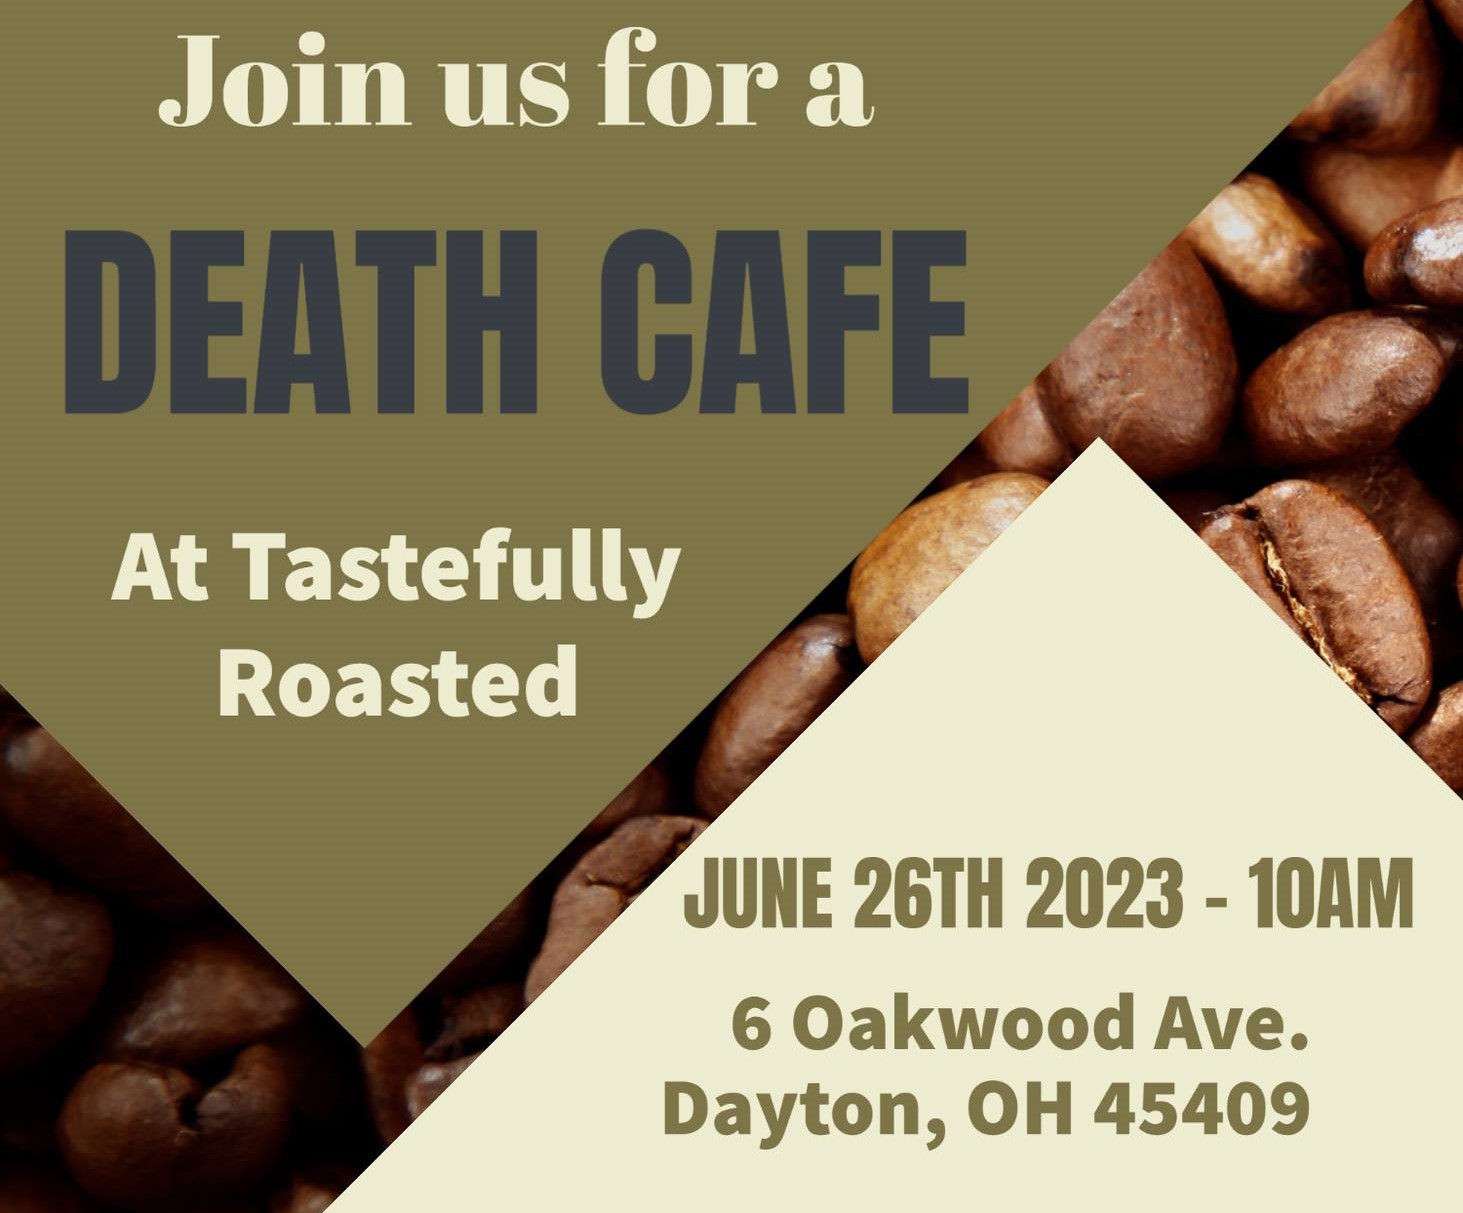 Join us for a Death Cafe